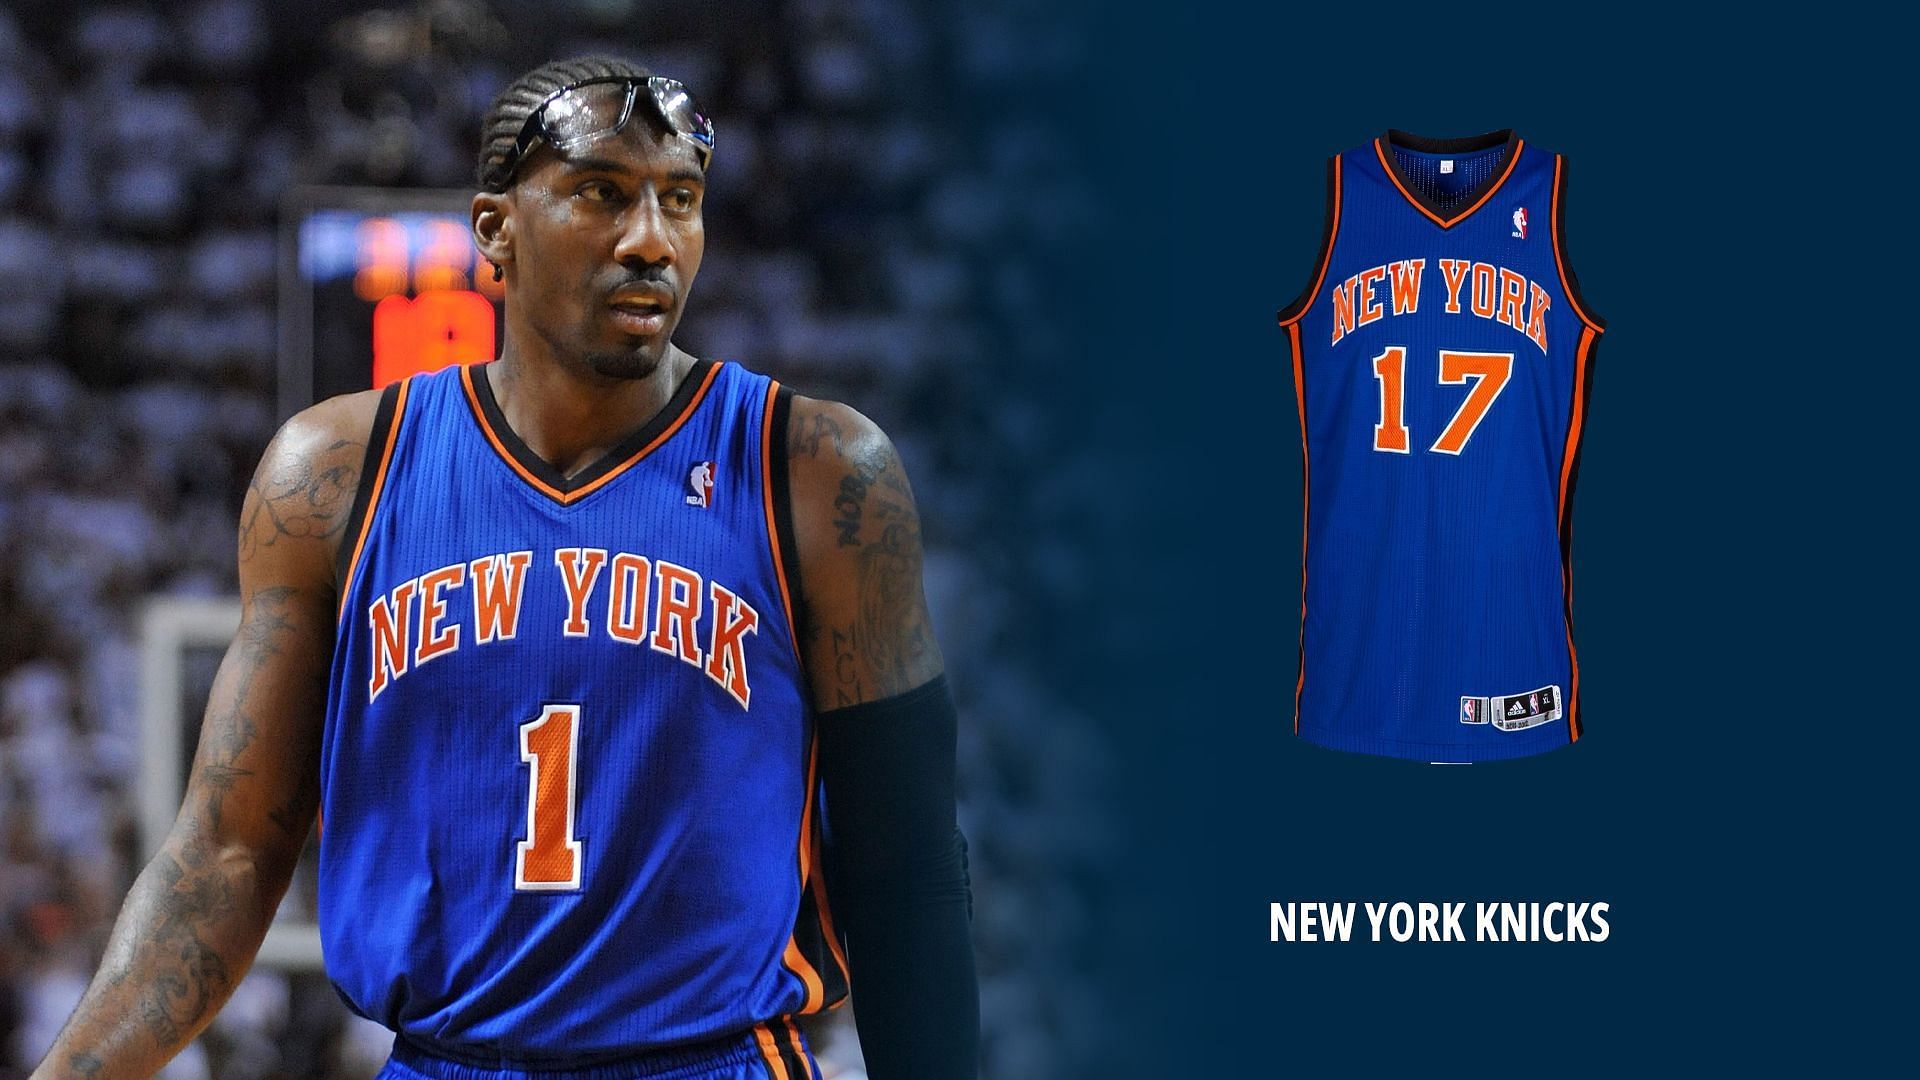 The Knicks have kept their jerseys simple for the majority of their existence